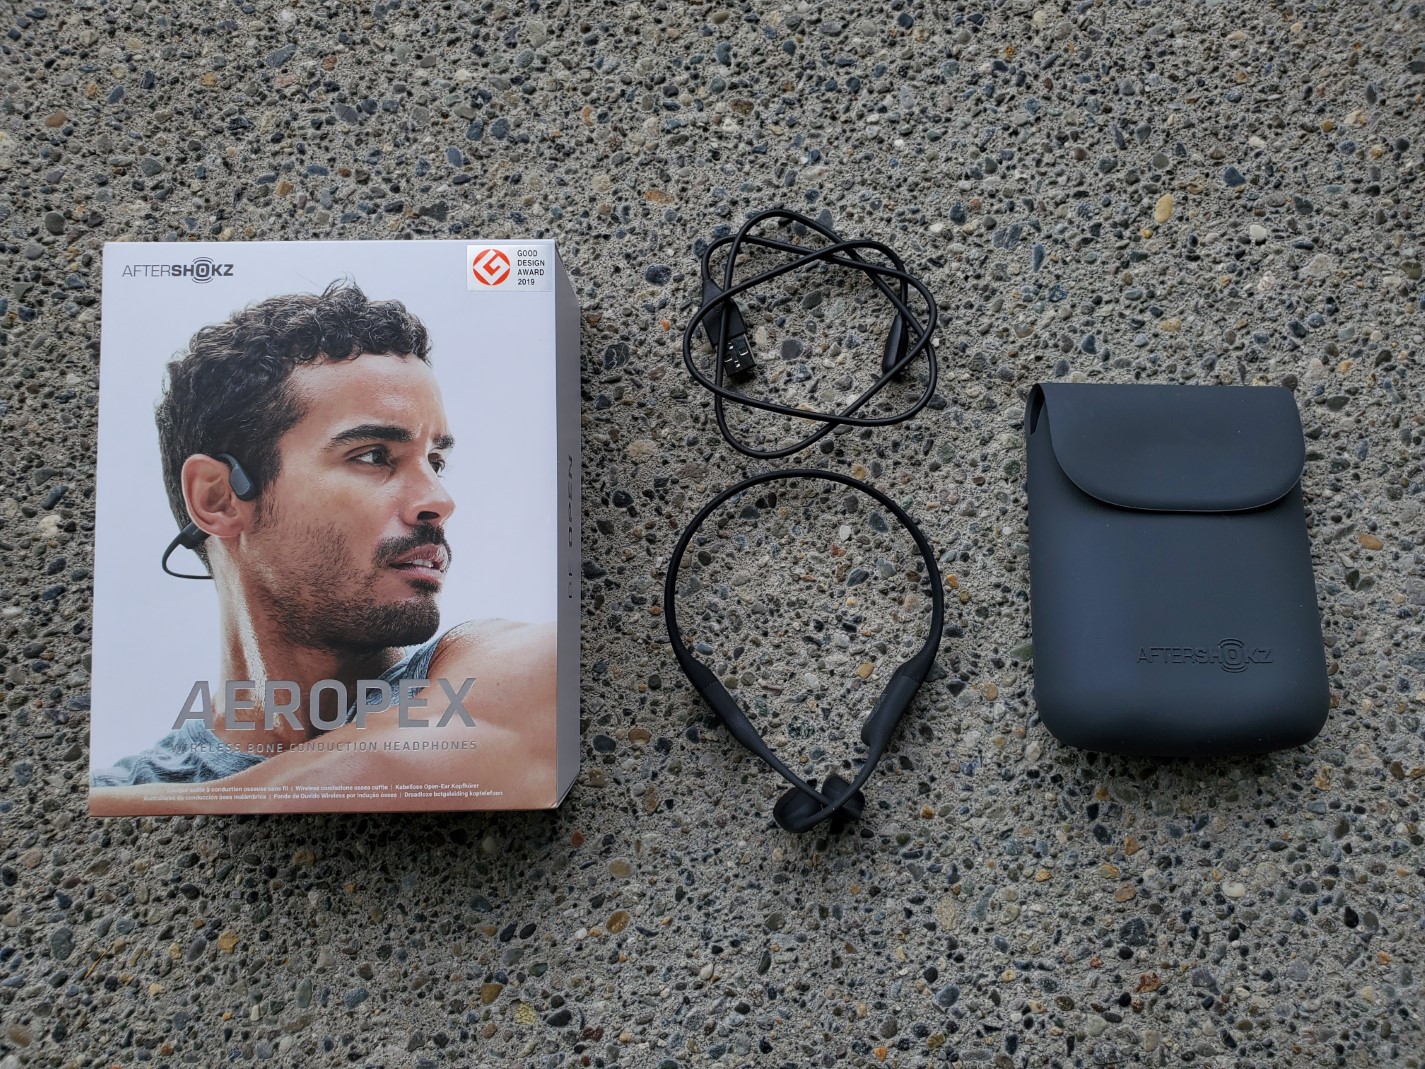 AfterShokz Aeropex review: Impressive bone conduction headset with